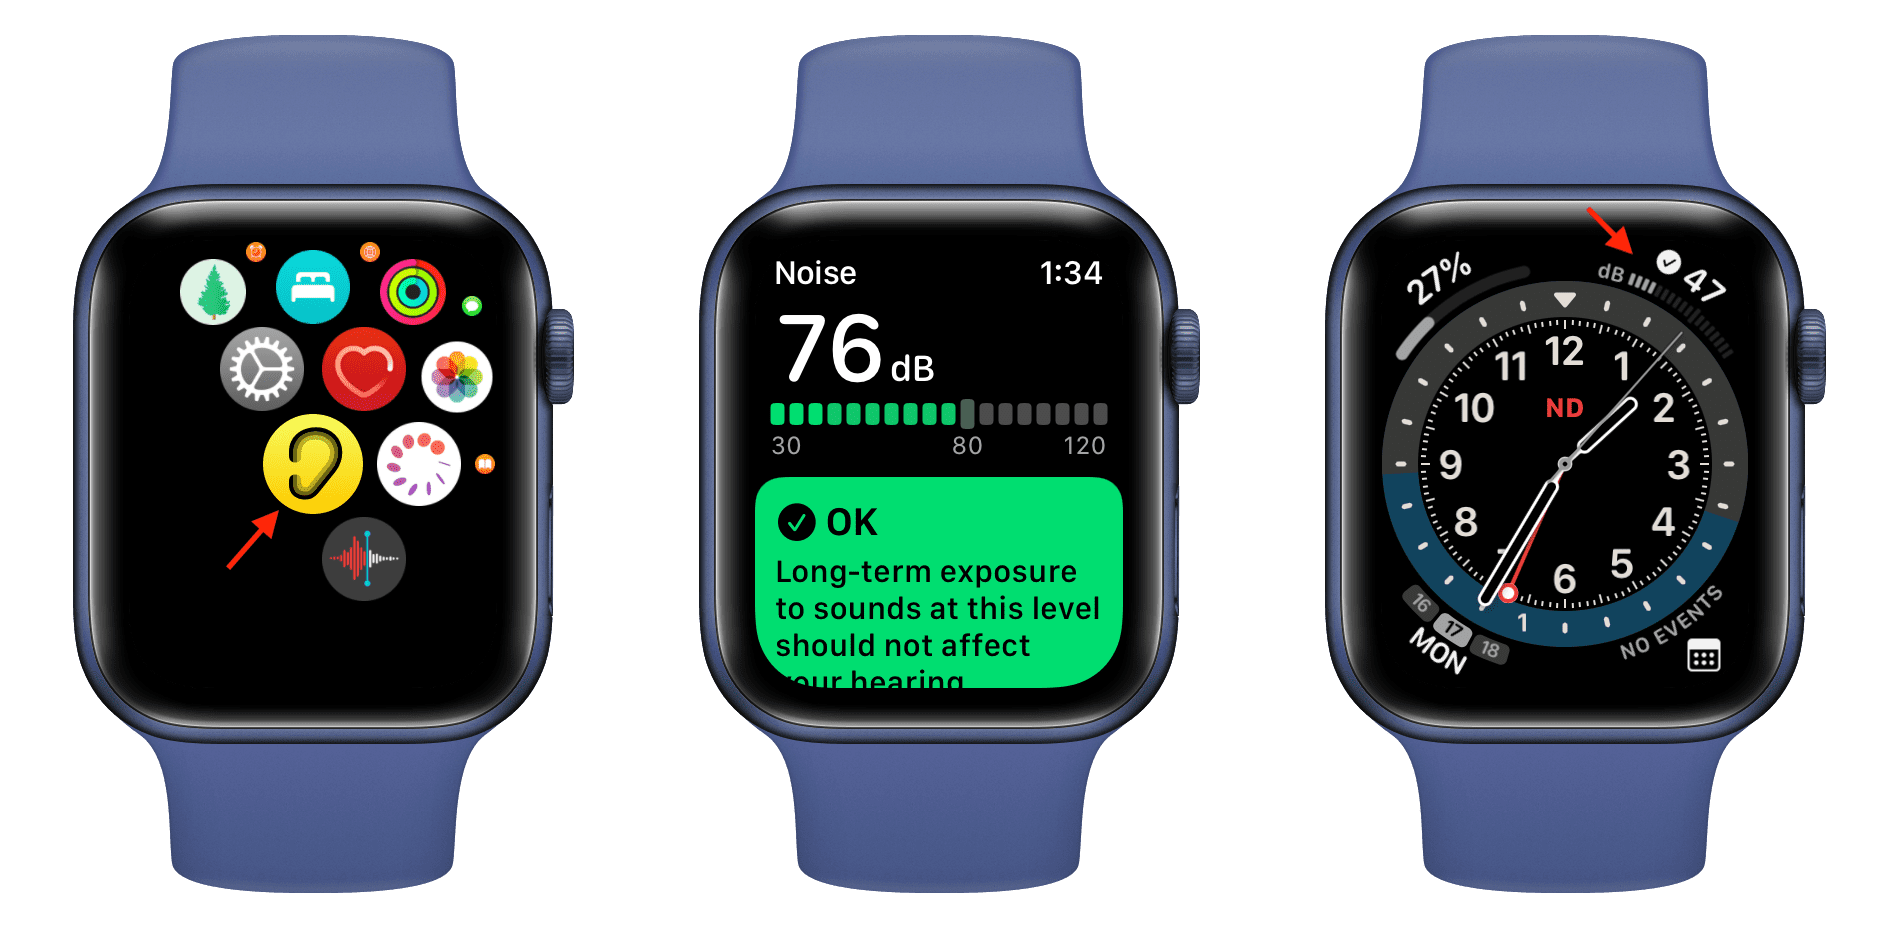 Noise app and noise level on Apple Watch